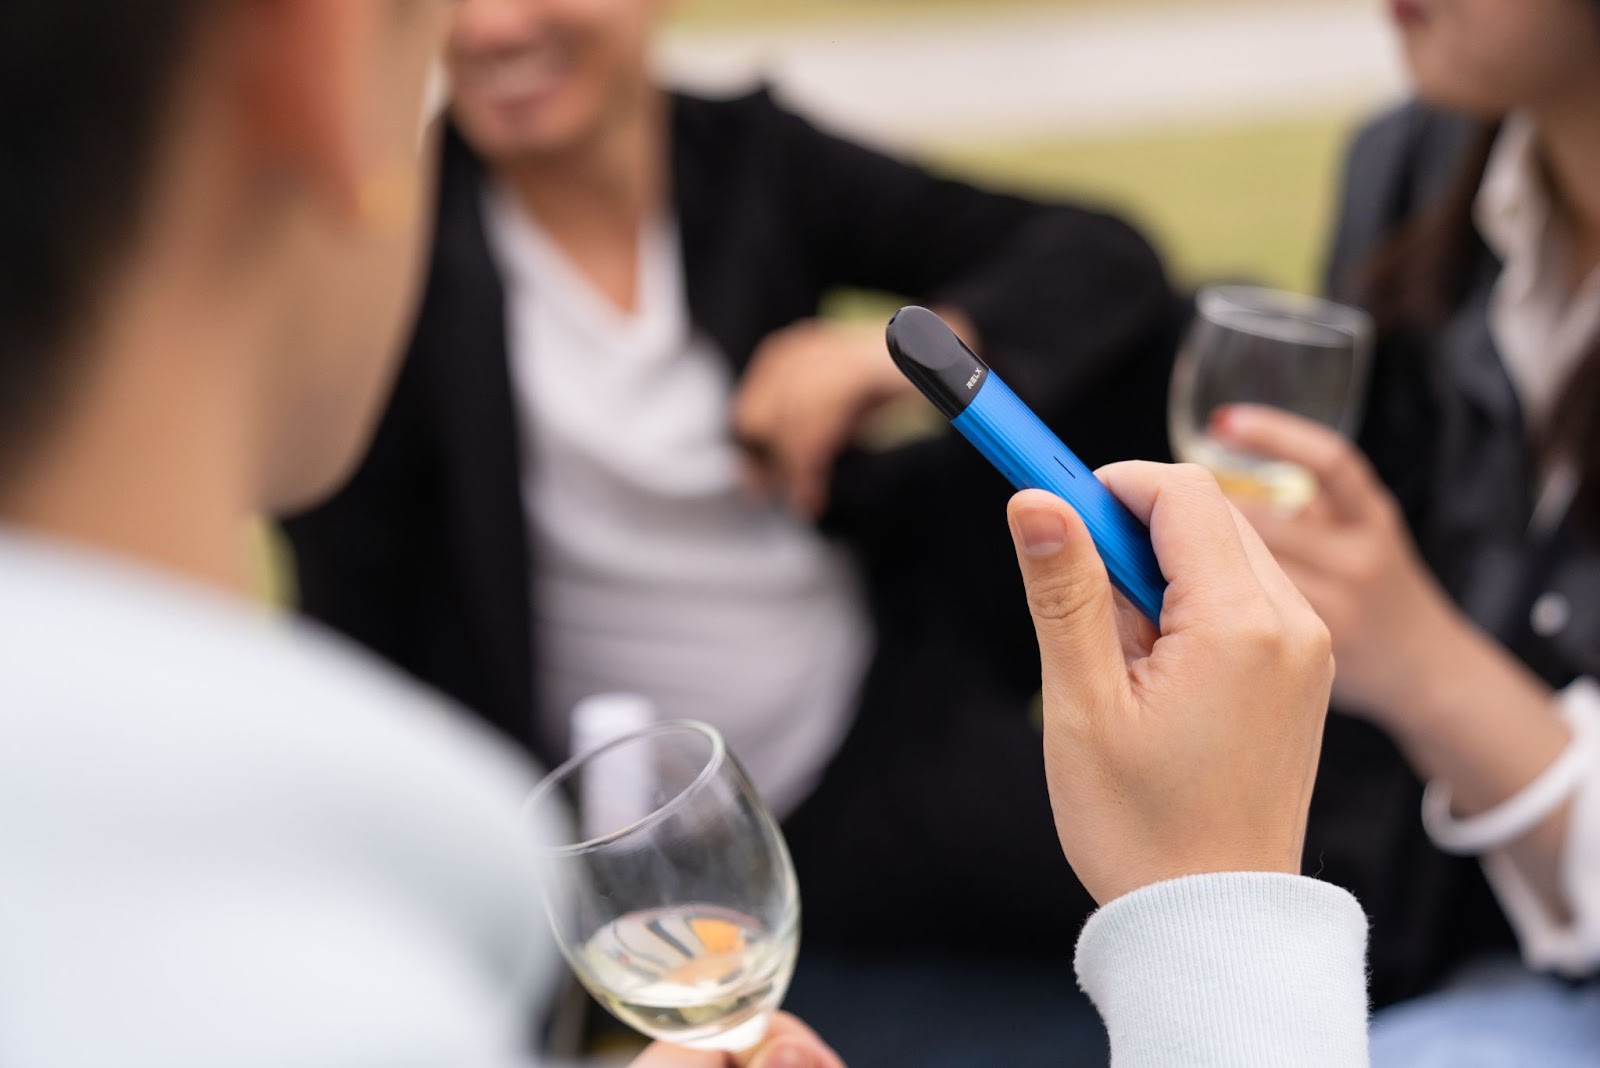 Group of people drinking wine and holding a vape device